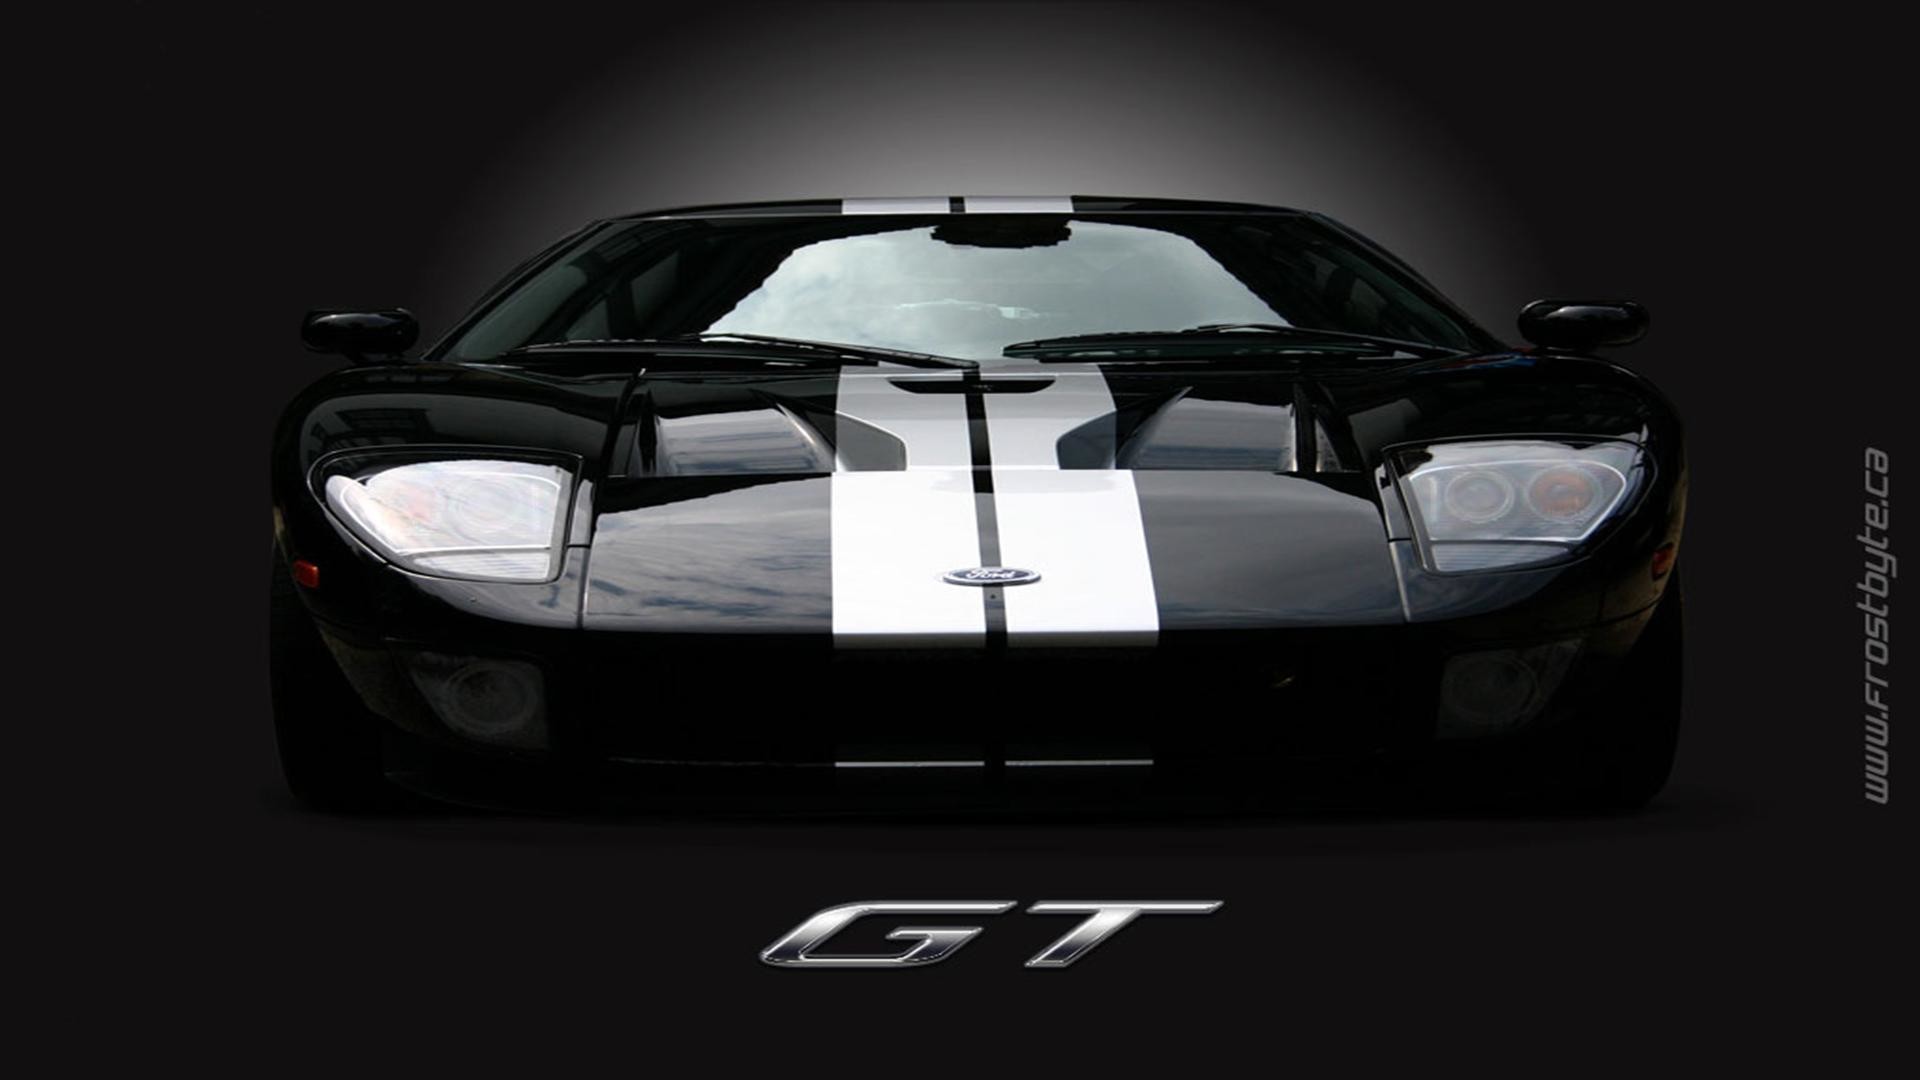 1920x1080 ... v 729 ford gt40 wallpapers high resolution hd images of ford ...